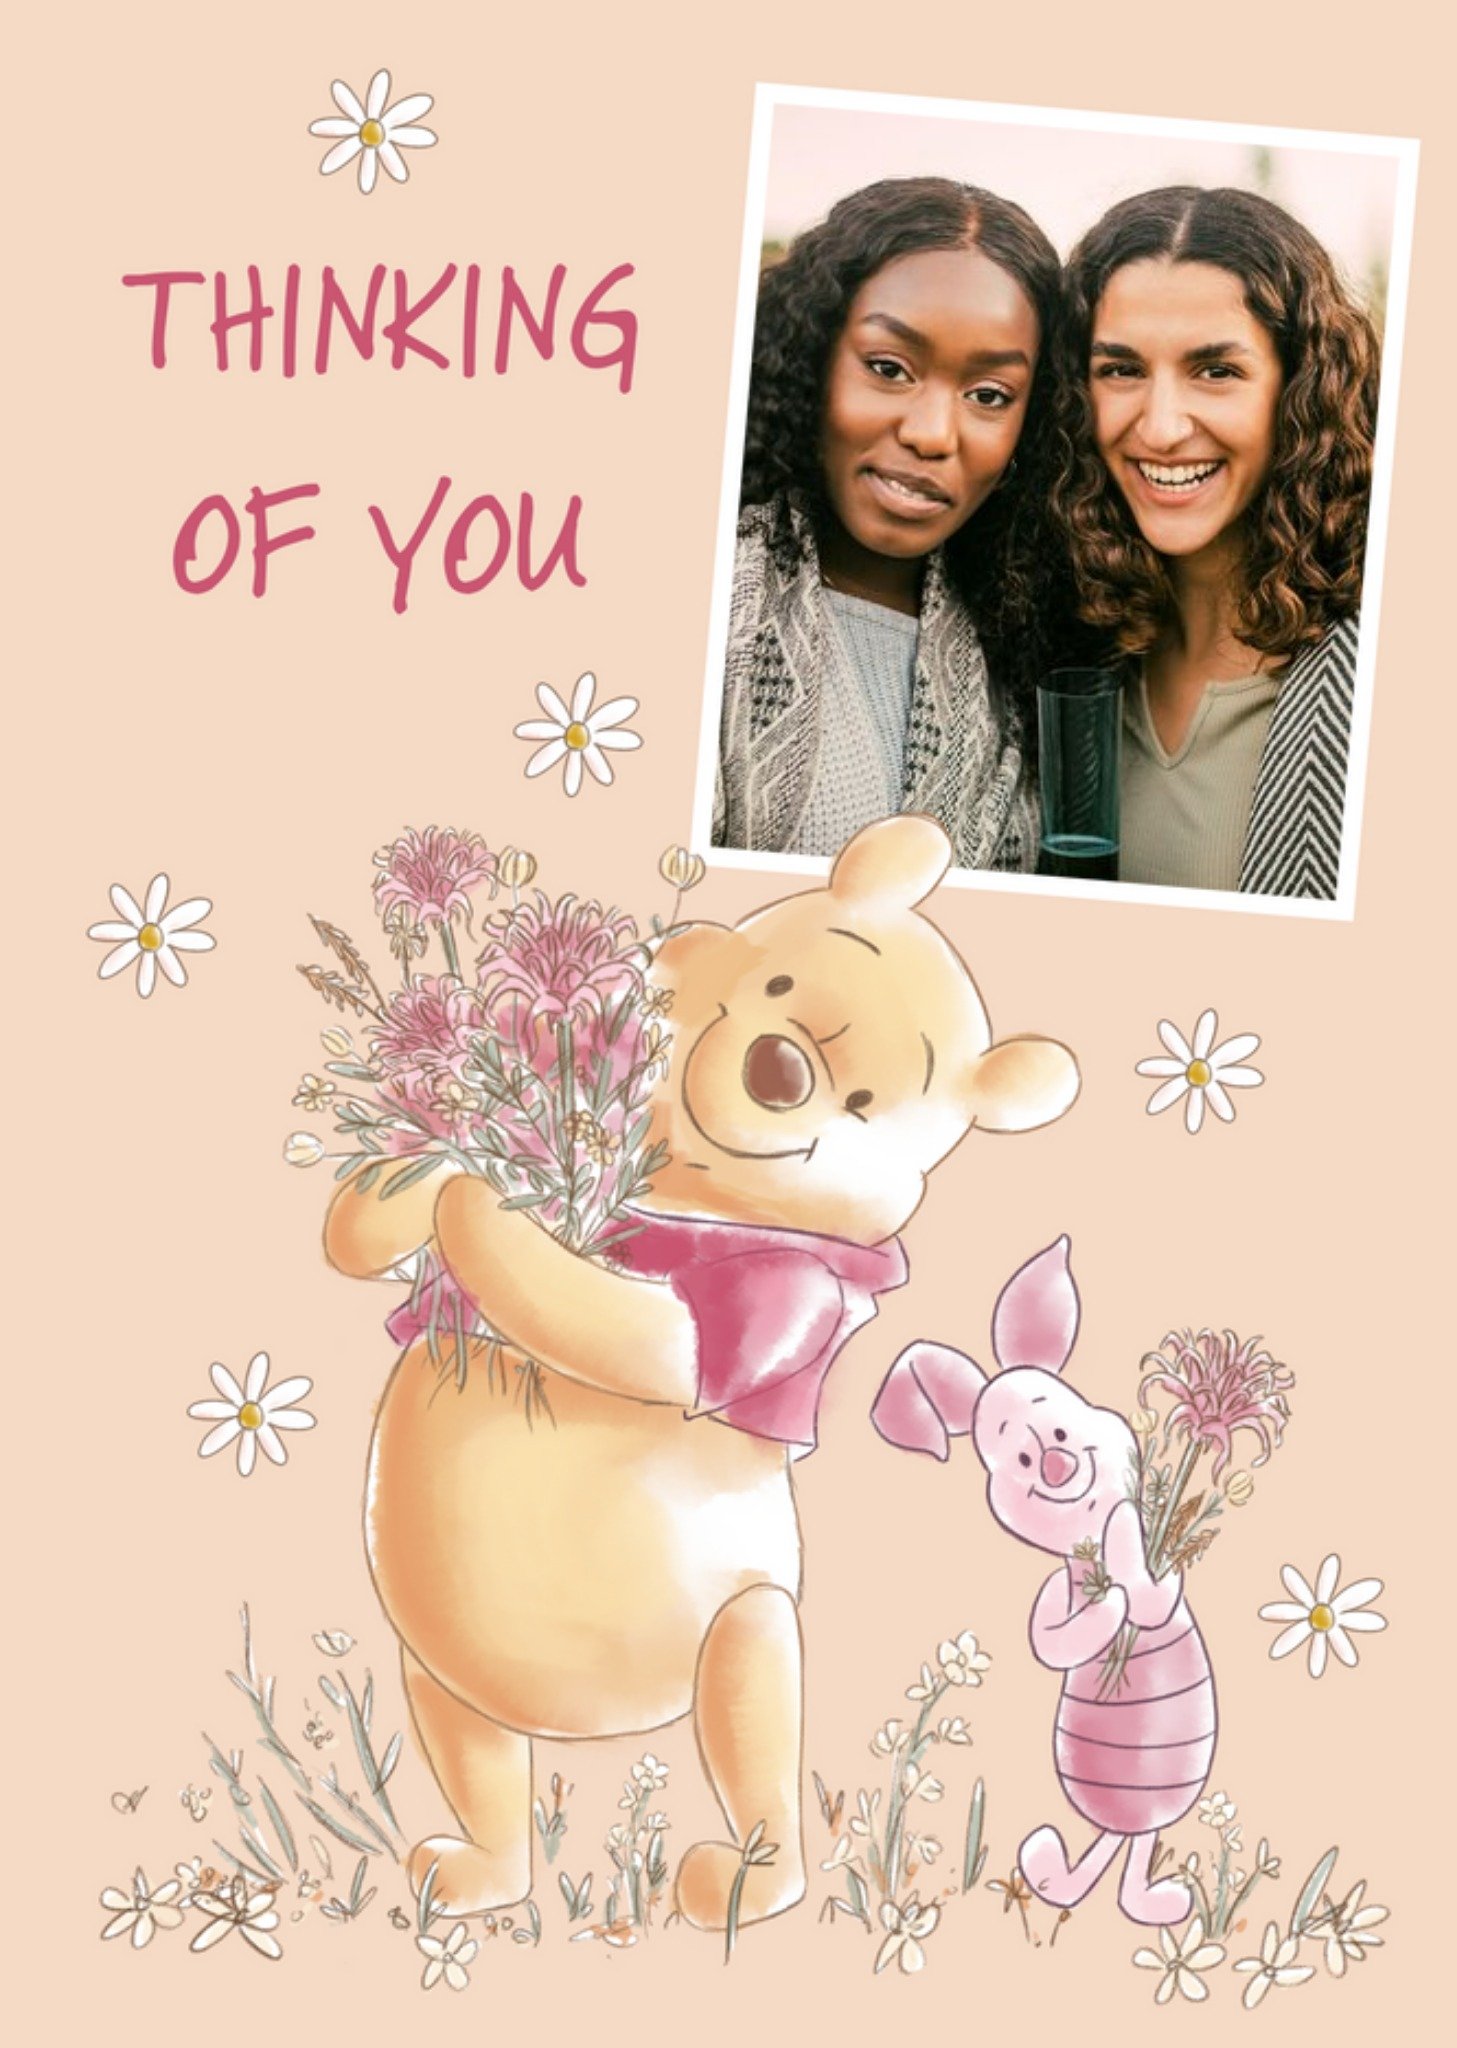 Winnie The Pooh And Piglet Illustration Thinking Of You Photo Upload Card, Large